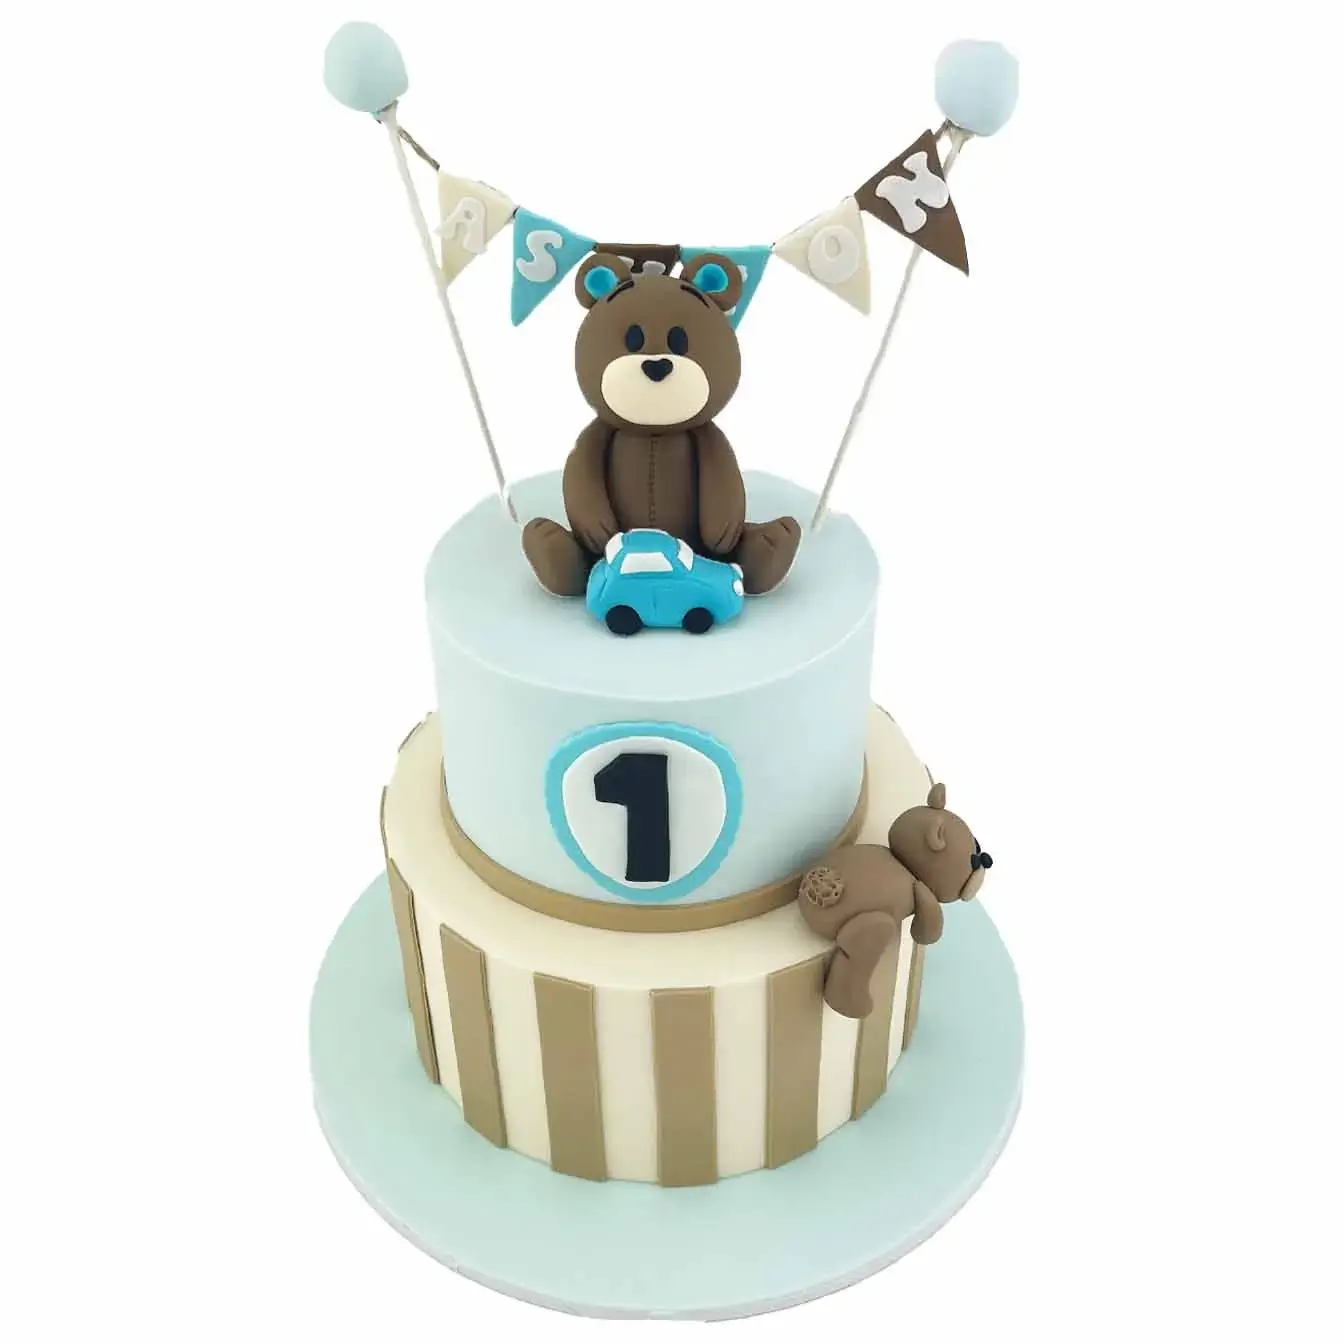 Teddy Bear Bunting Cake - A charming two-tier cake with moulded teddy bears, bunting, and stripes, perfect for joyous celebrations